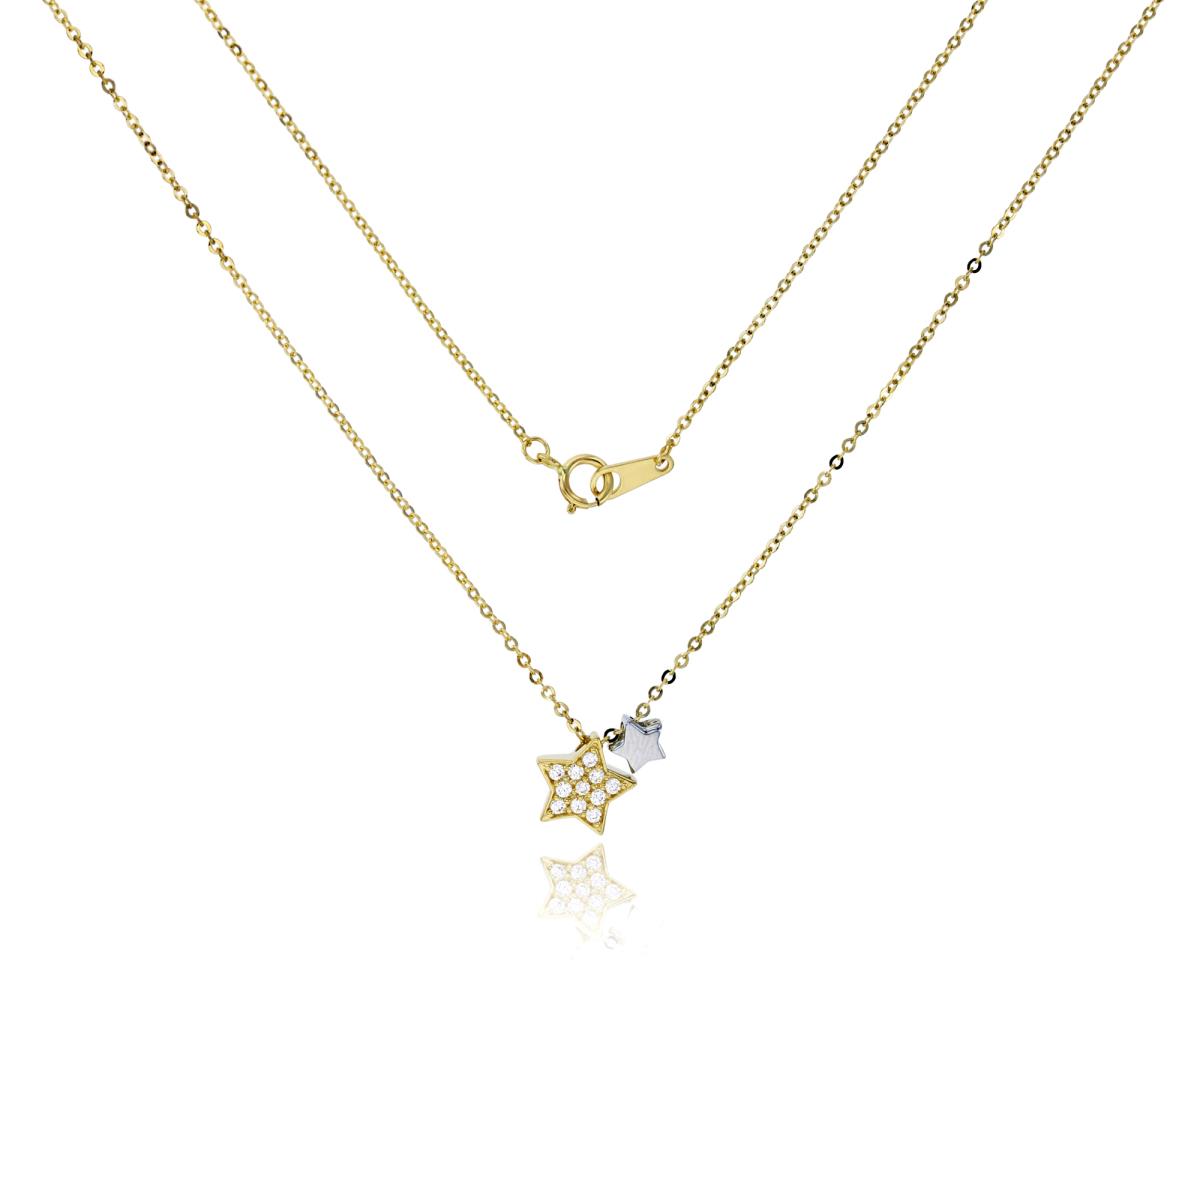 14K Two-Tone Gold Micropave & Polished Stars 16" Necklace